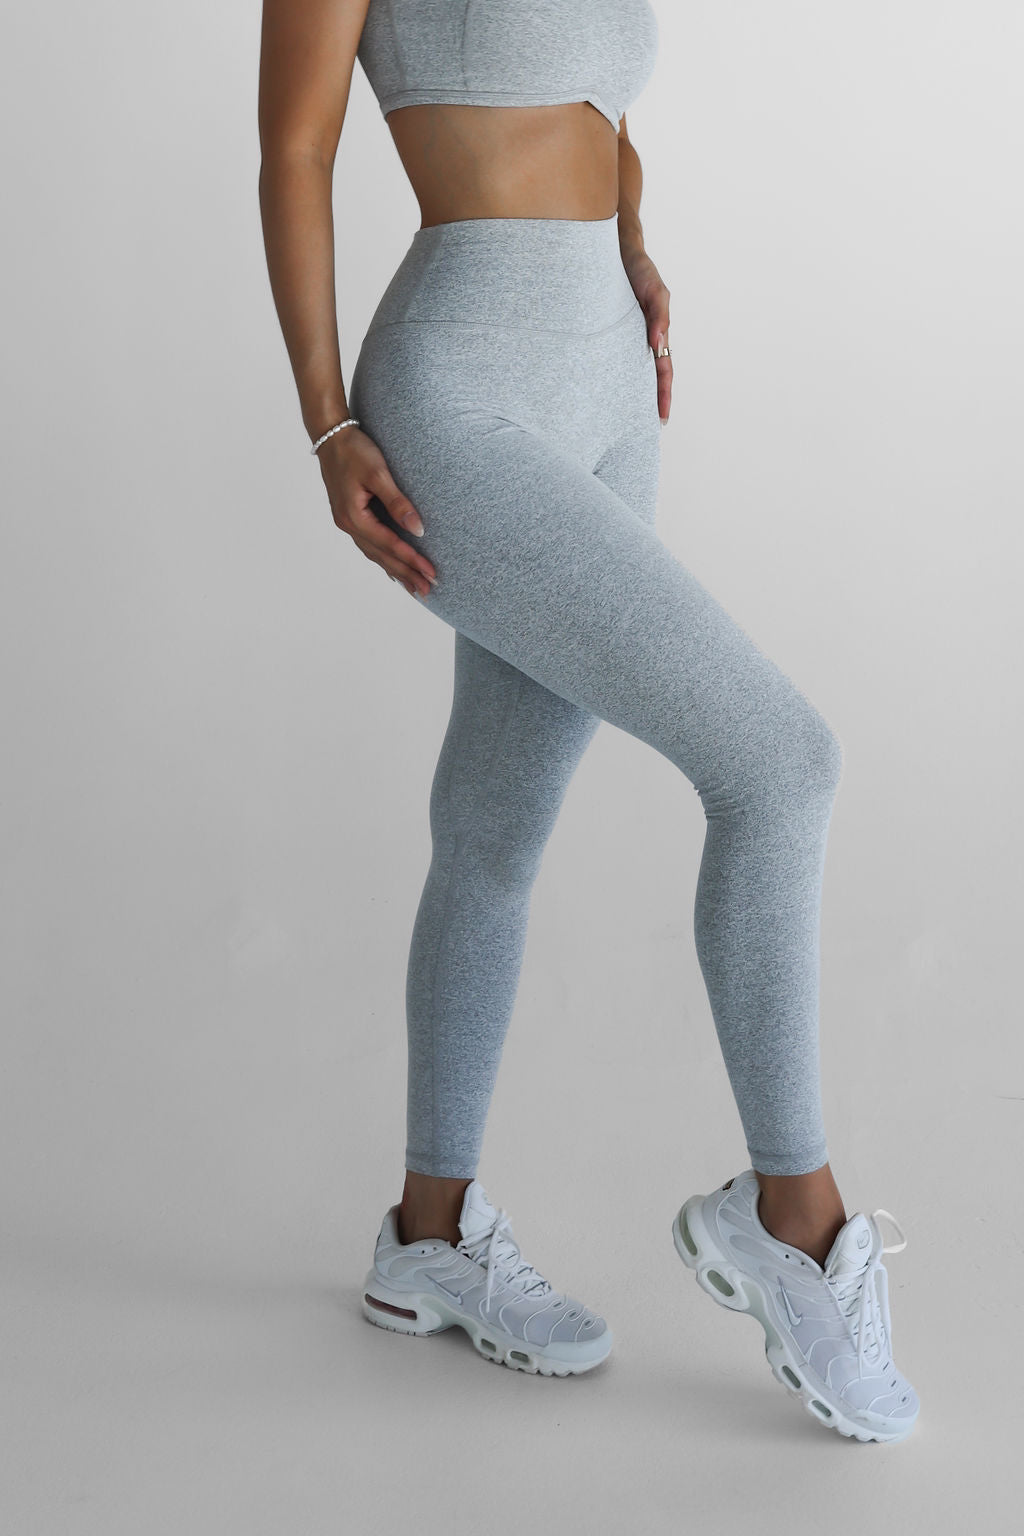 High Rated Full Leggings Marl Waisted, Grey, 5 Squat Star - Proof, Length Signature